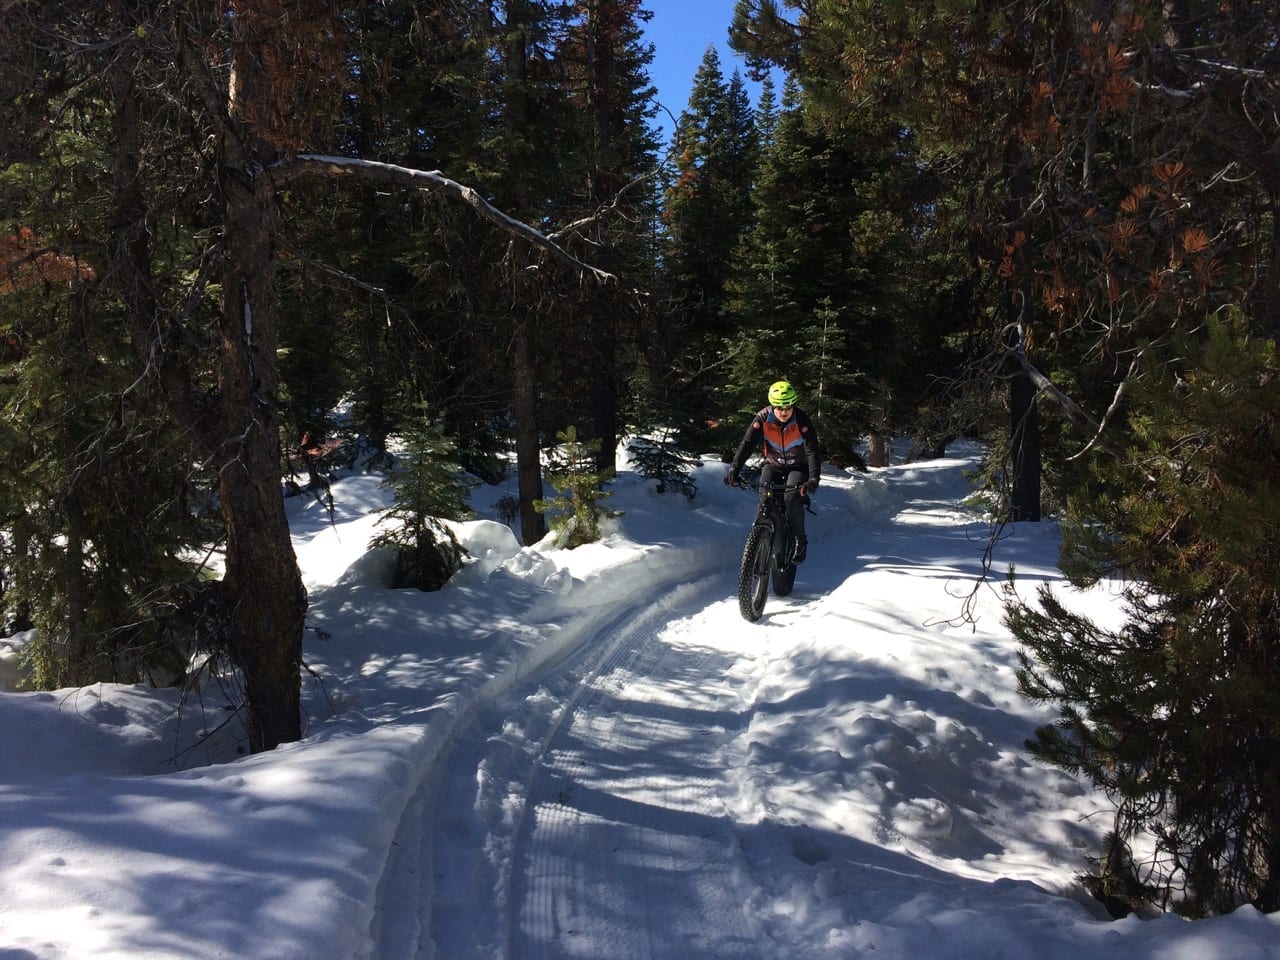 Fat biking on the groomed trails at Wanoga Sno-Park in Bend, Oregon